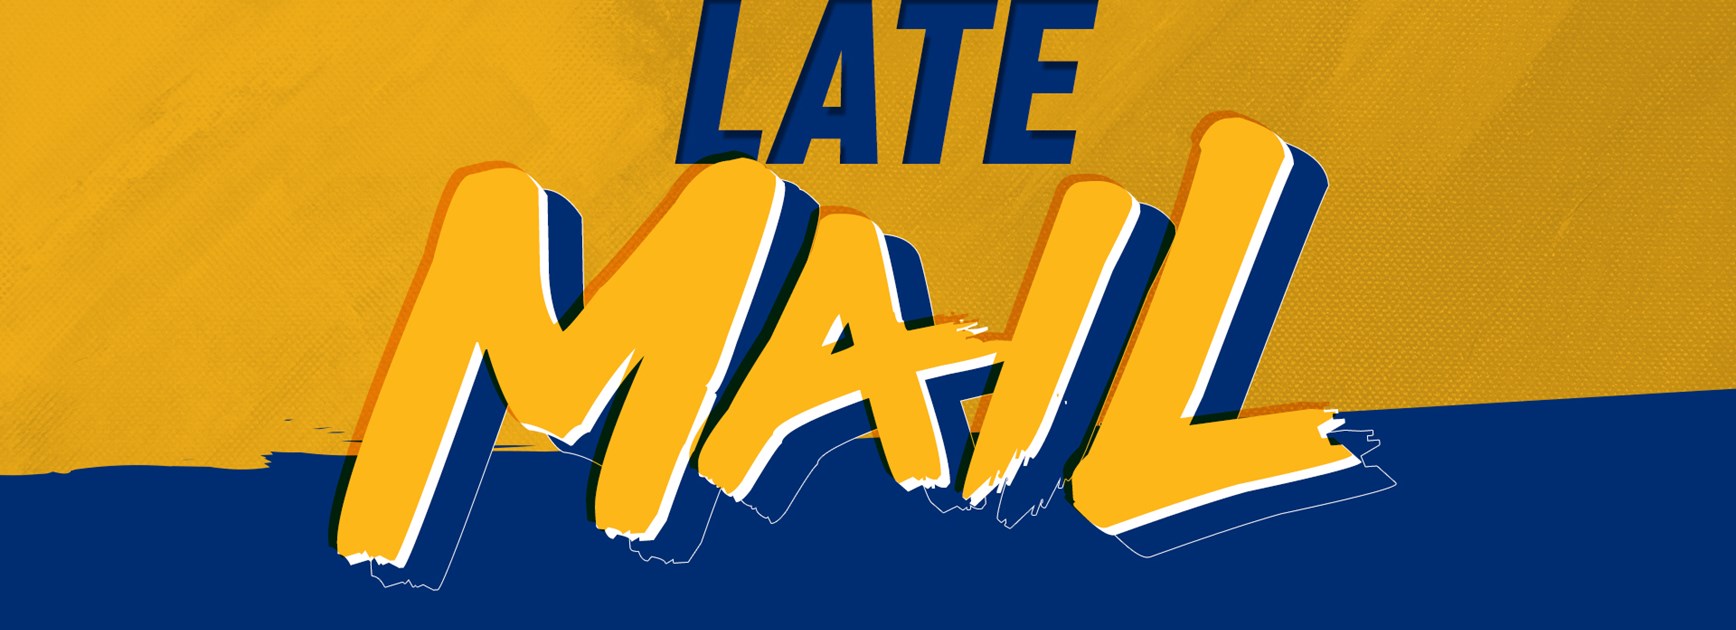 Eels v Titans Late Mail